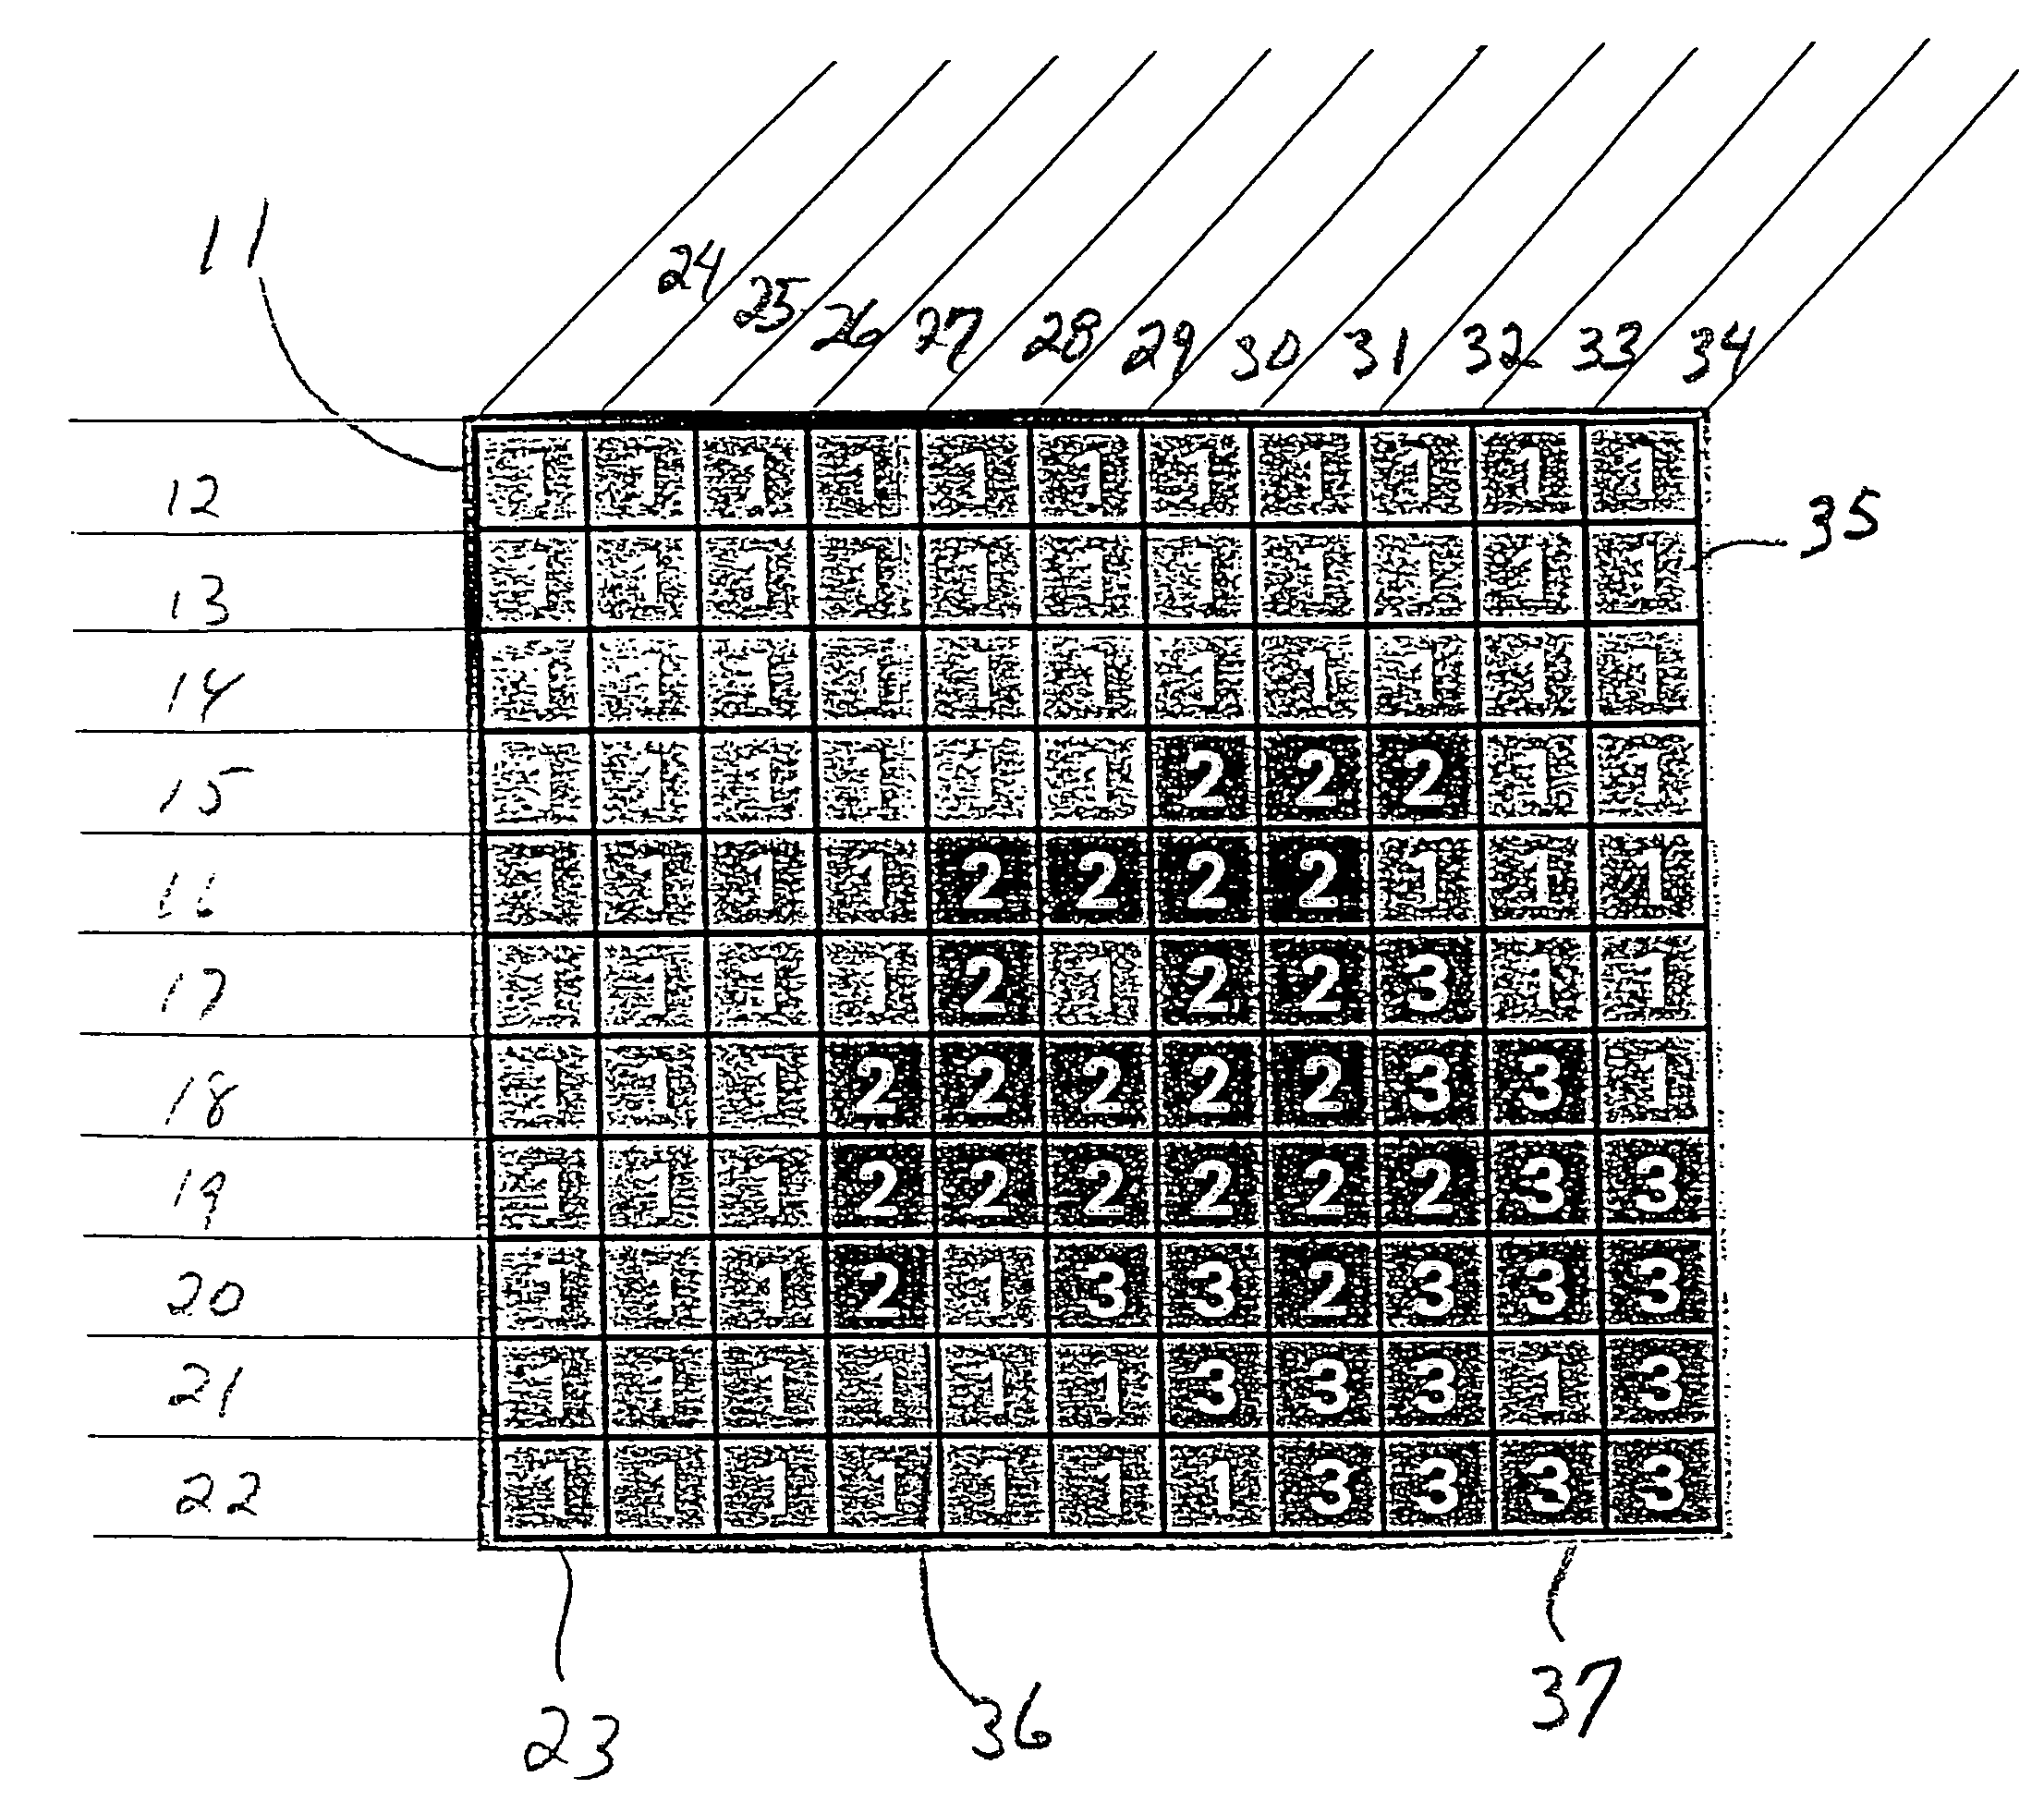 Curable adhesive composition, adhesive kit and method of adhering substrates